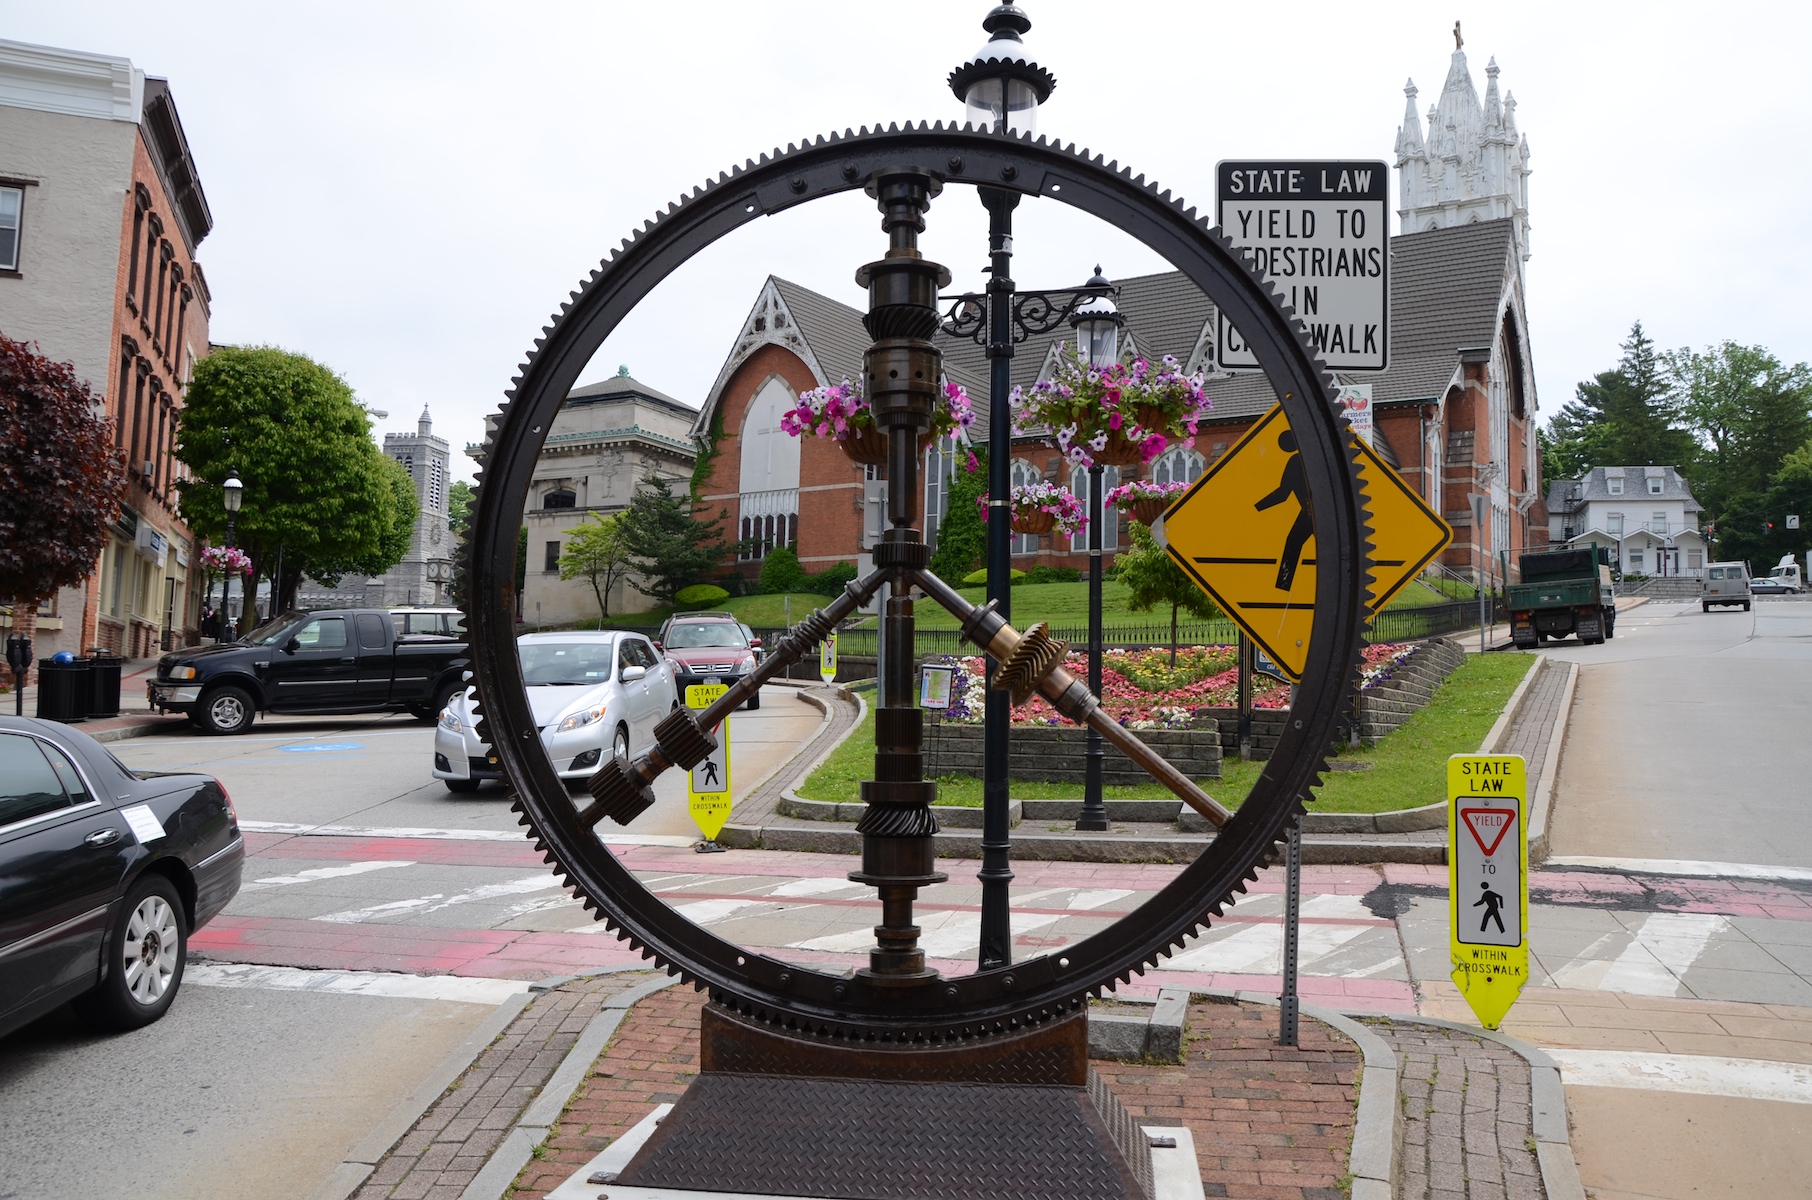 James Havens’ “Let’s Roll,” one of three sculptures from the “Ossining in 3D” bicentennial sculpture exhibit to become a permanent fixture in the Village of Ossining.